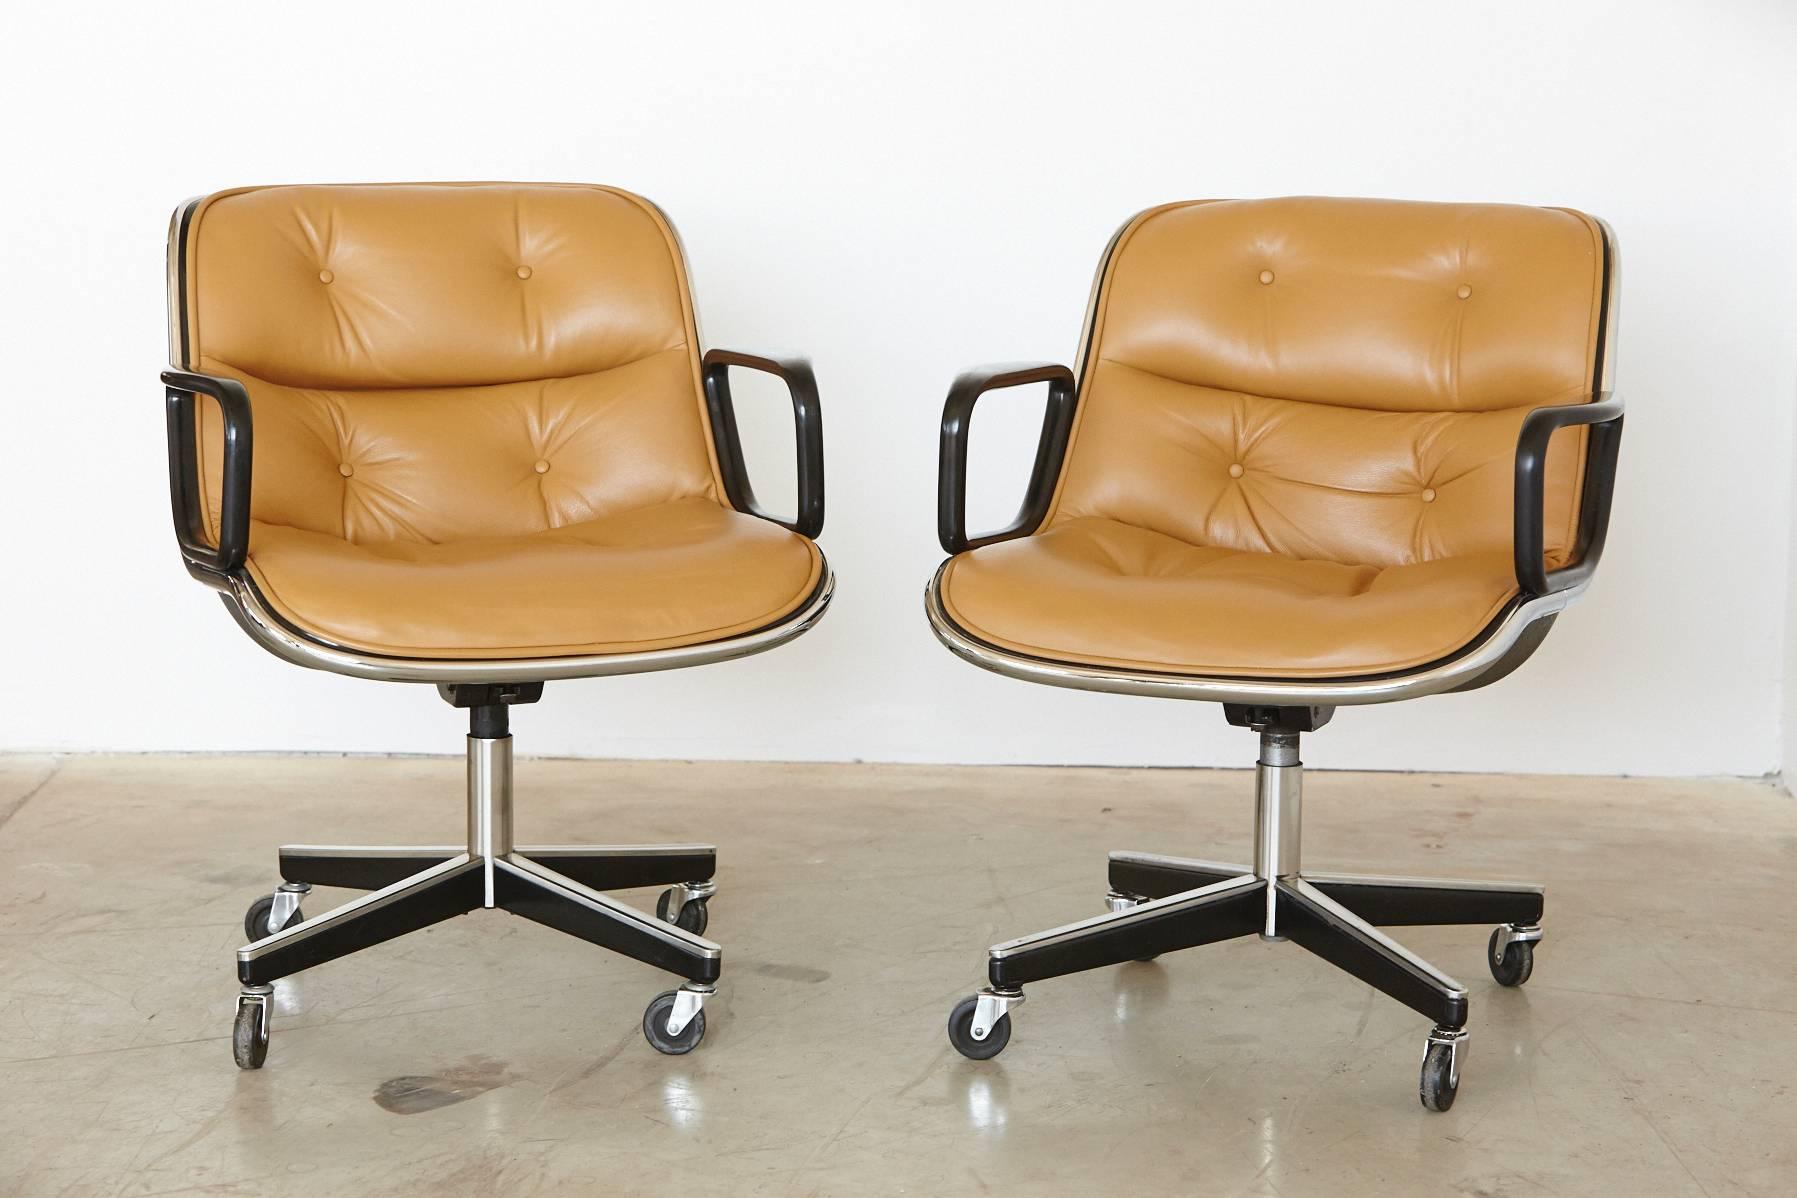 Original Charles Pollock Executive Chair Upholstered in Edelman Leather 3